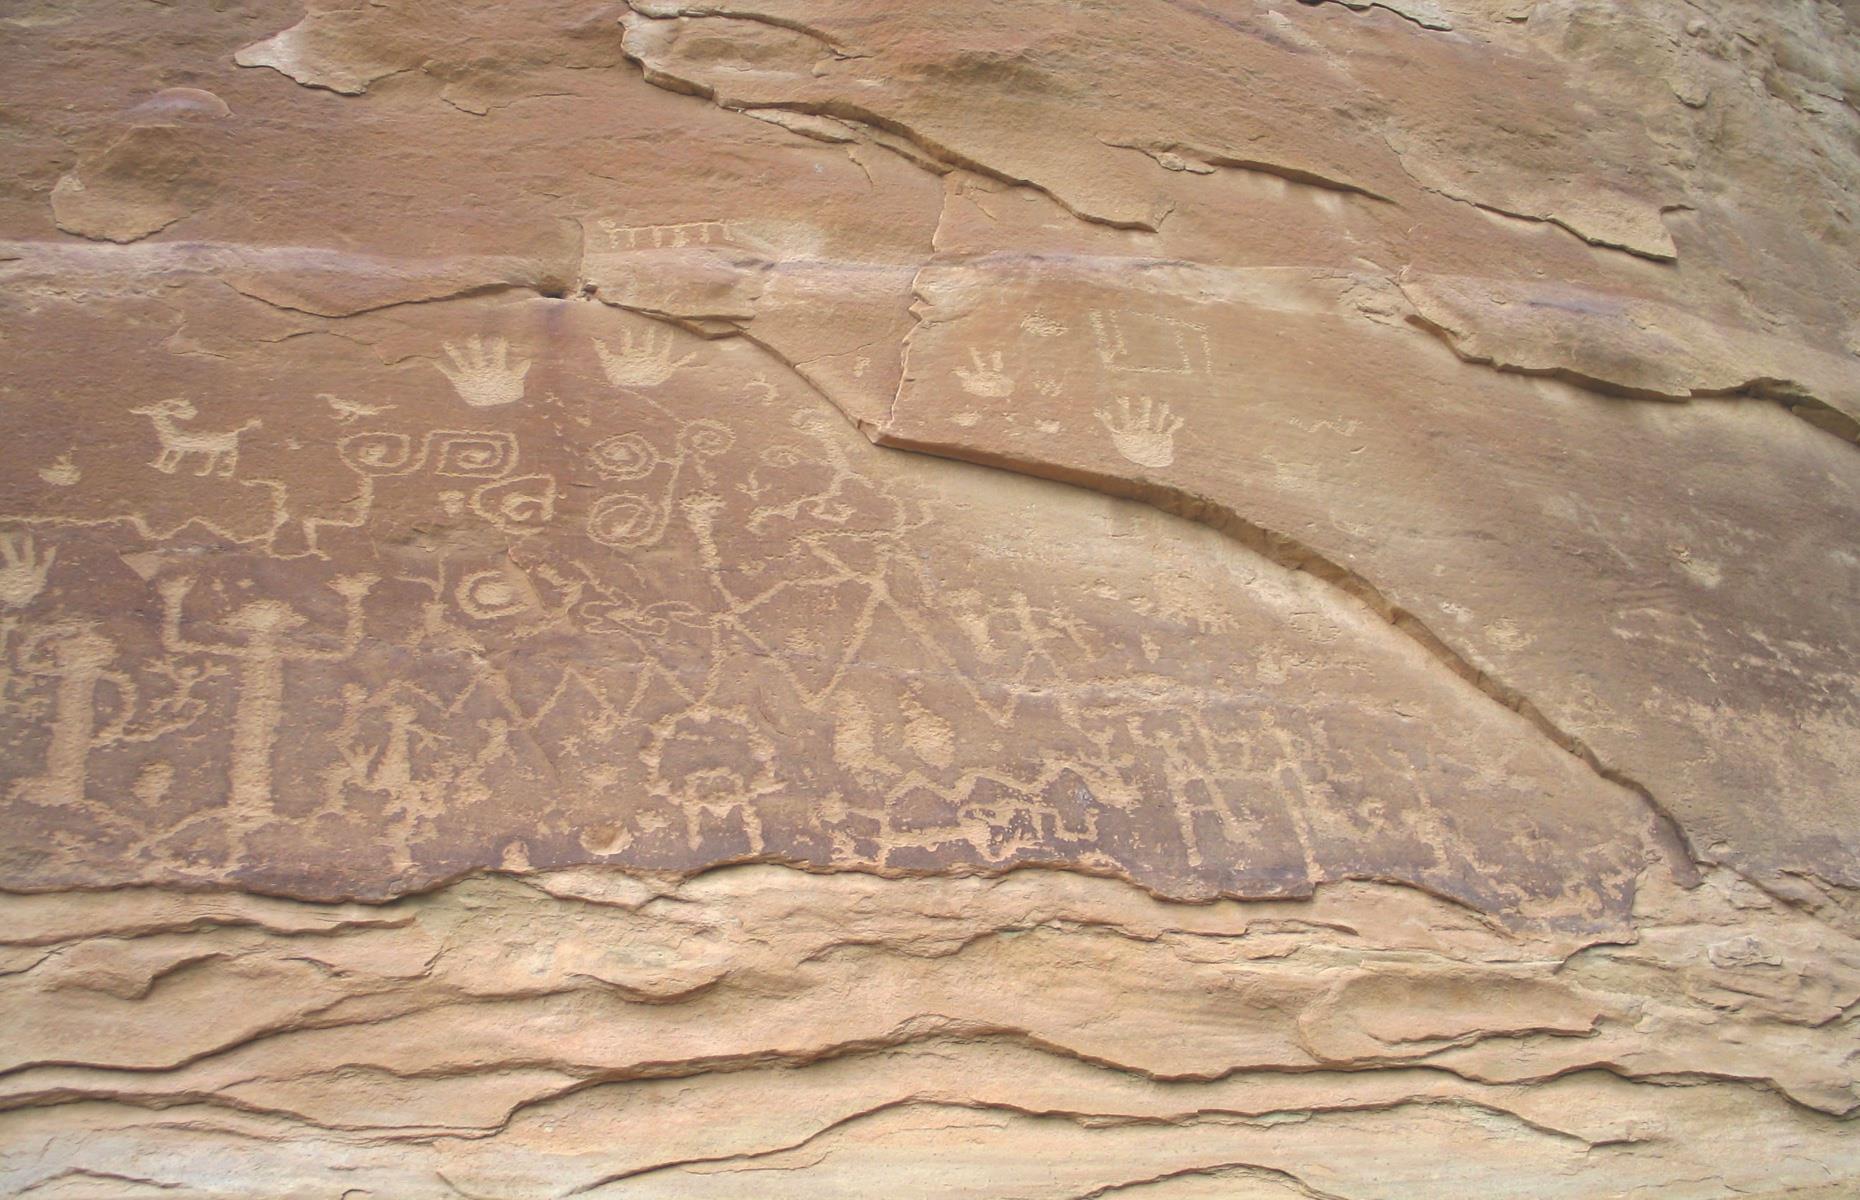 <p>Petroglyphs are carvings in rocks that feature motifs including figures in procession, handprints, animal tracks, wavy lines, spirals, concentric circles, animals and hunting scenes. According to Puebloan experts, they're said to reflect perceptions of place, environmental situations and hope for what may come. The main rock art panel in the park is called Petroglyph Point (pictured).</p>